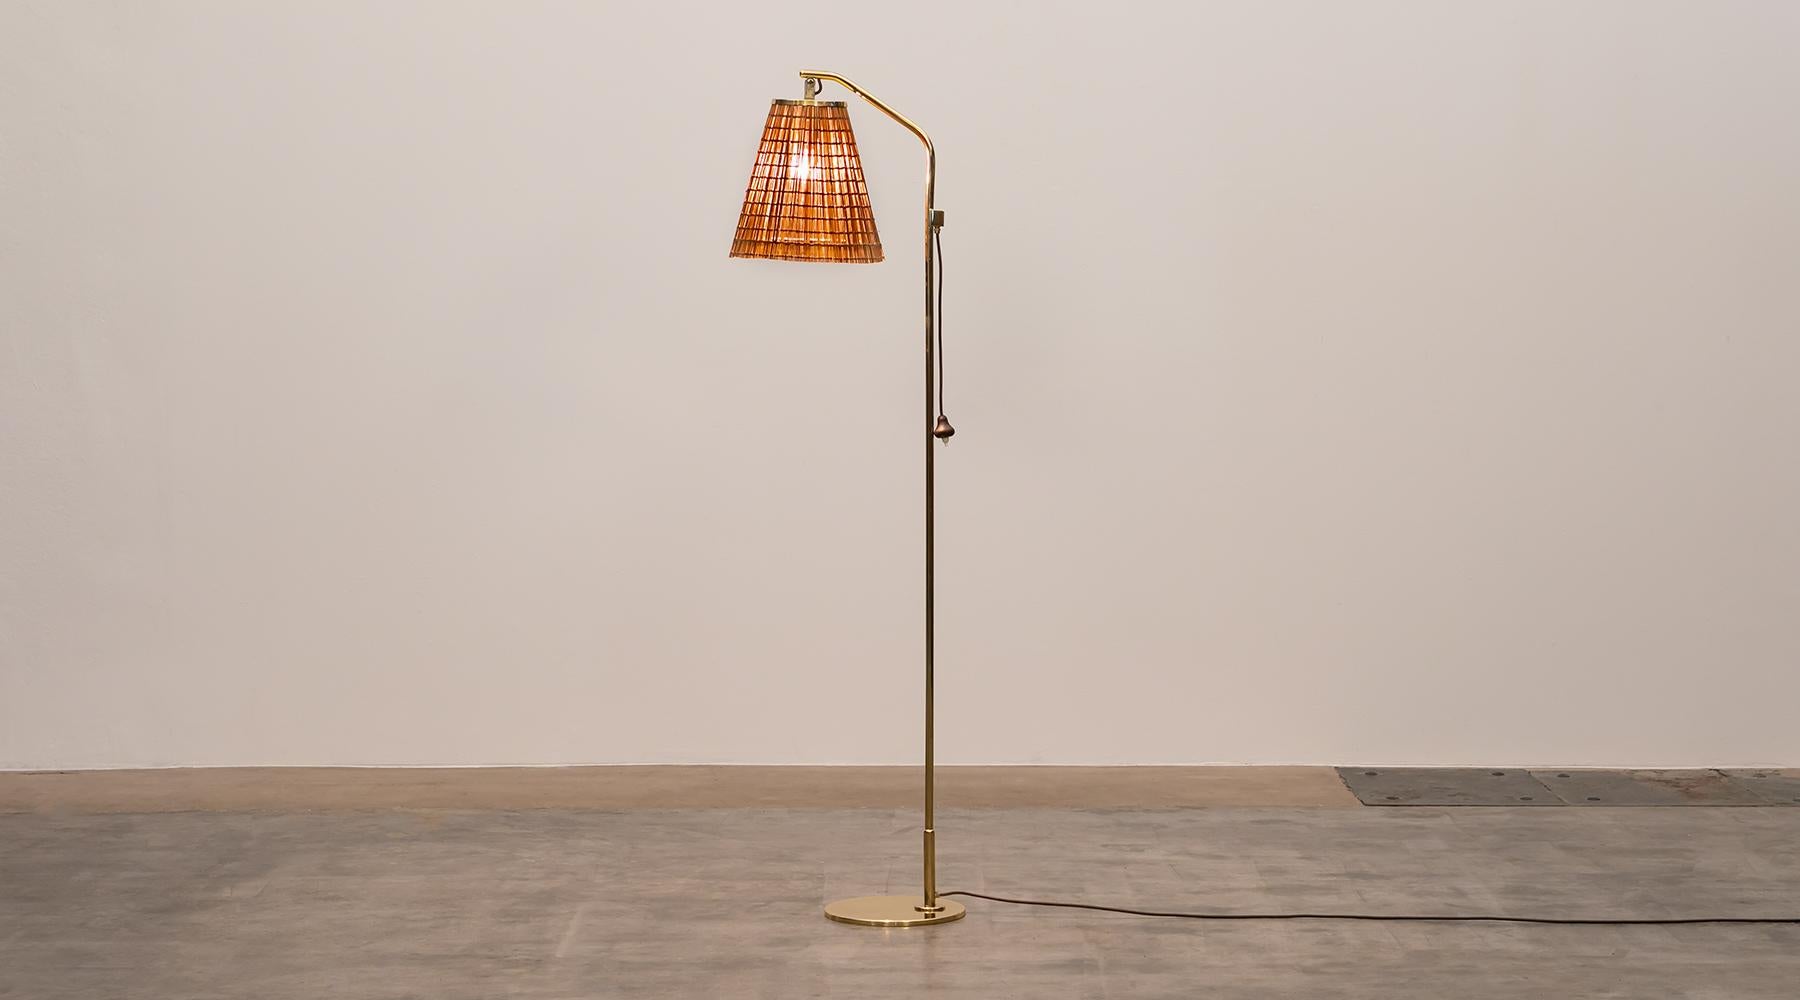 Wicker lampshade and brass stem floor lamp by Paavo Tynell, Finland, 1940s.

Very elegant floor lamp designed by famous Finnish Paavo Tynell giving a warm charming light. The 